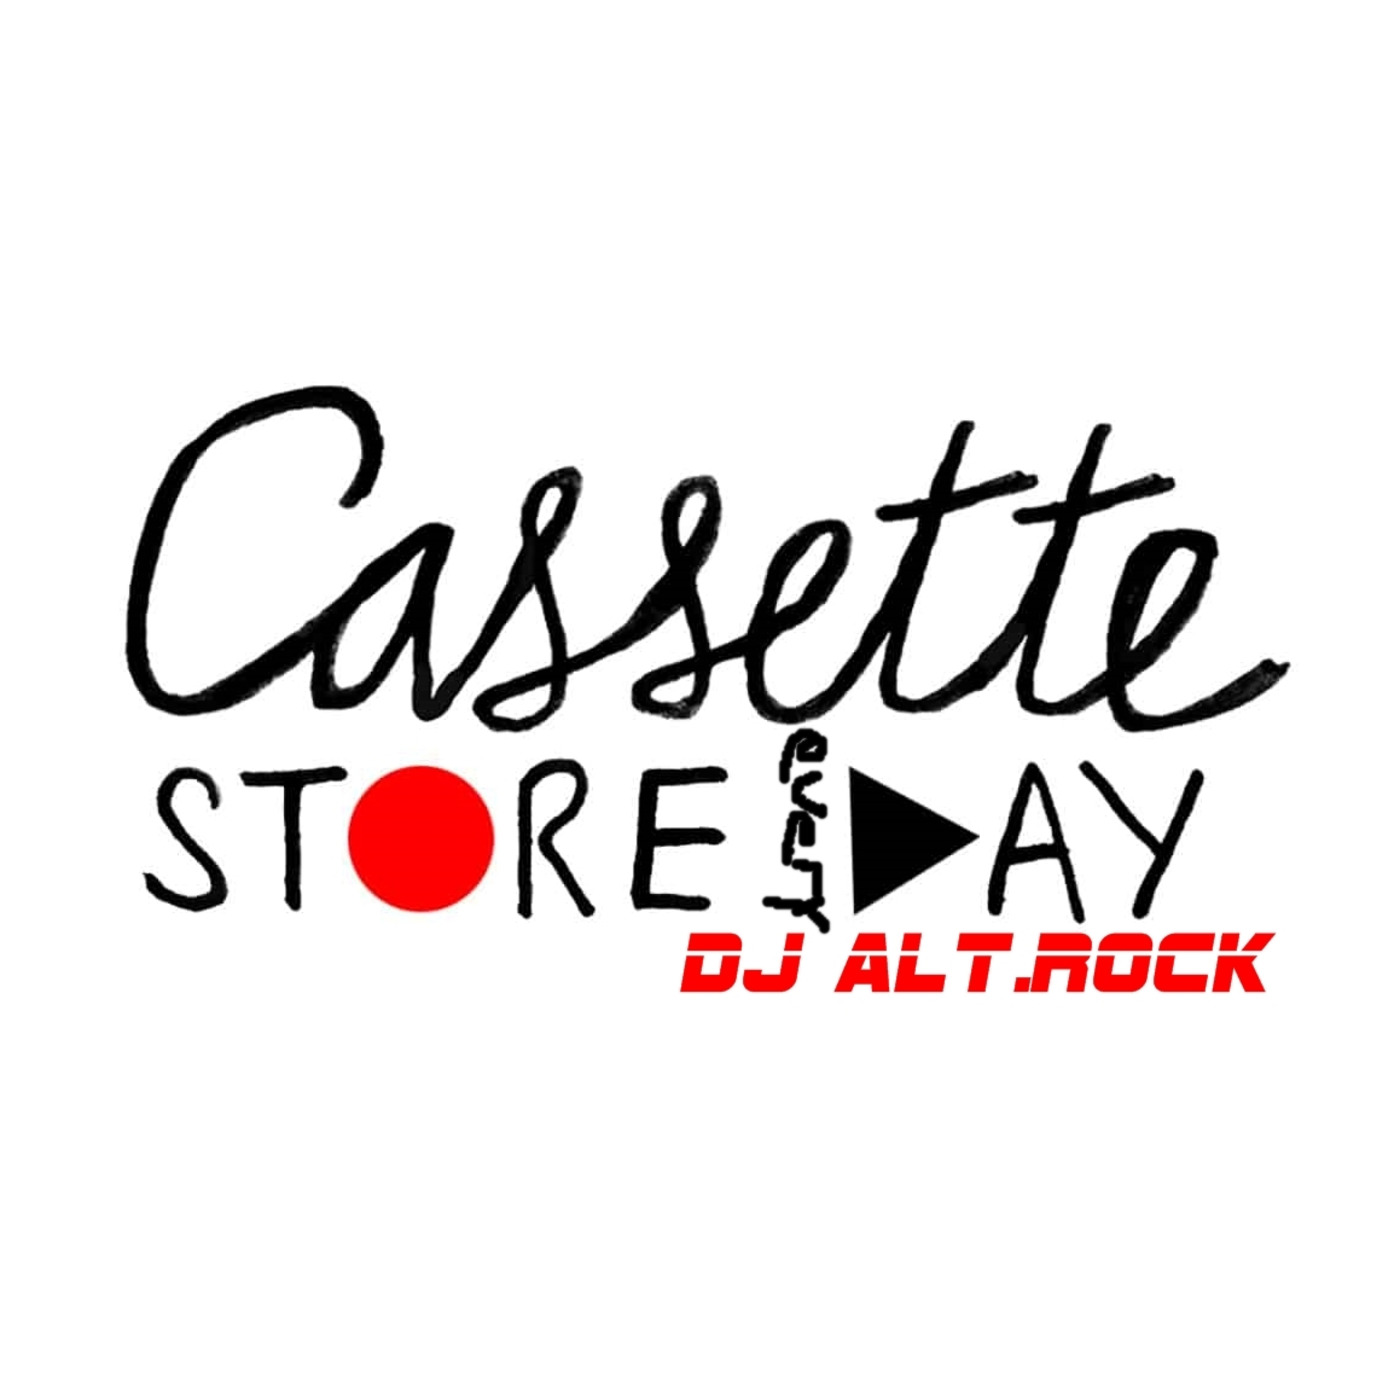 Cassette Store Day Mix Live at the Octopus Literary Salon in Oakland, California